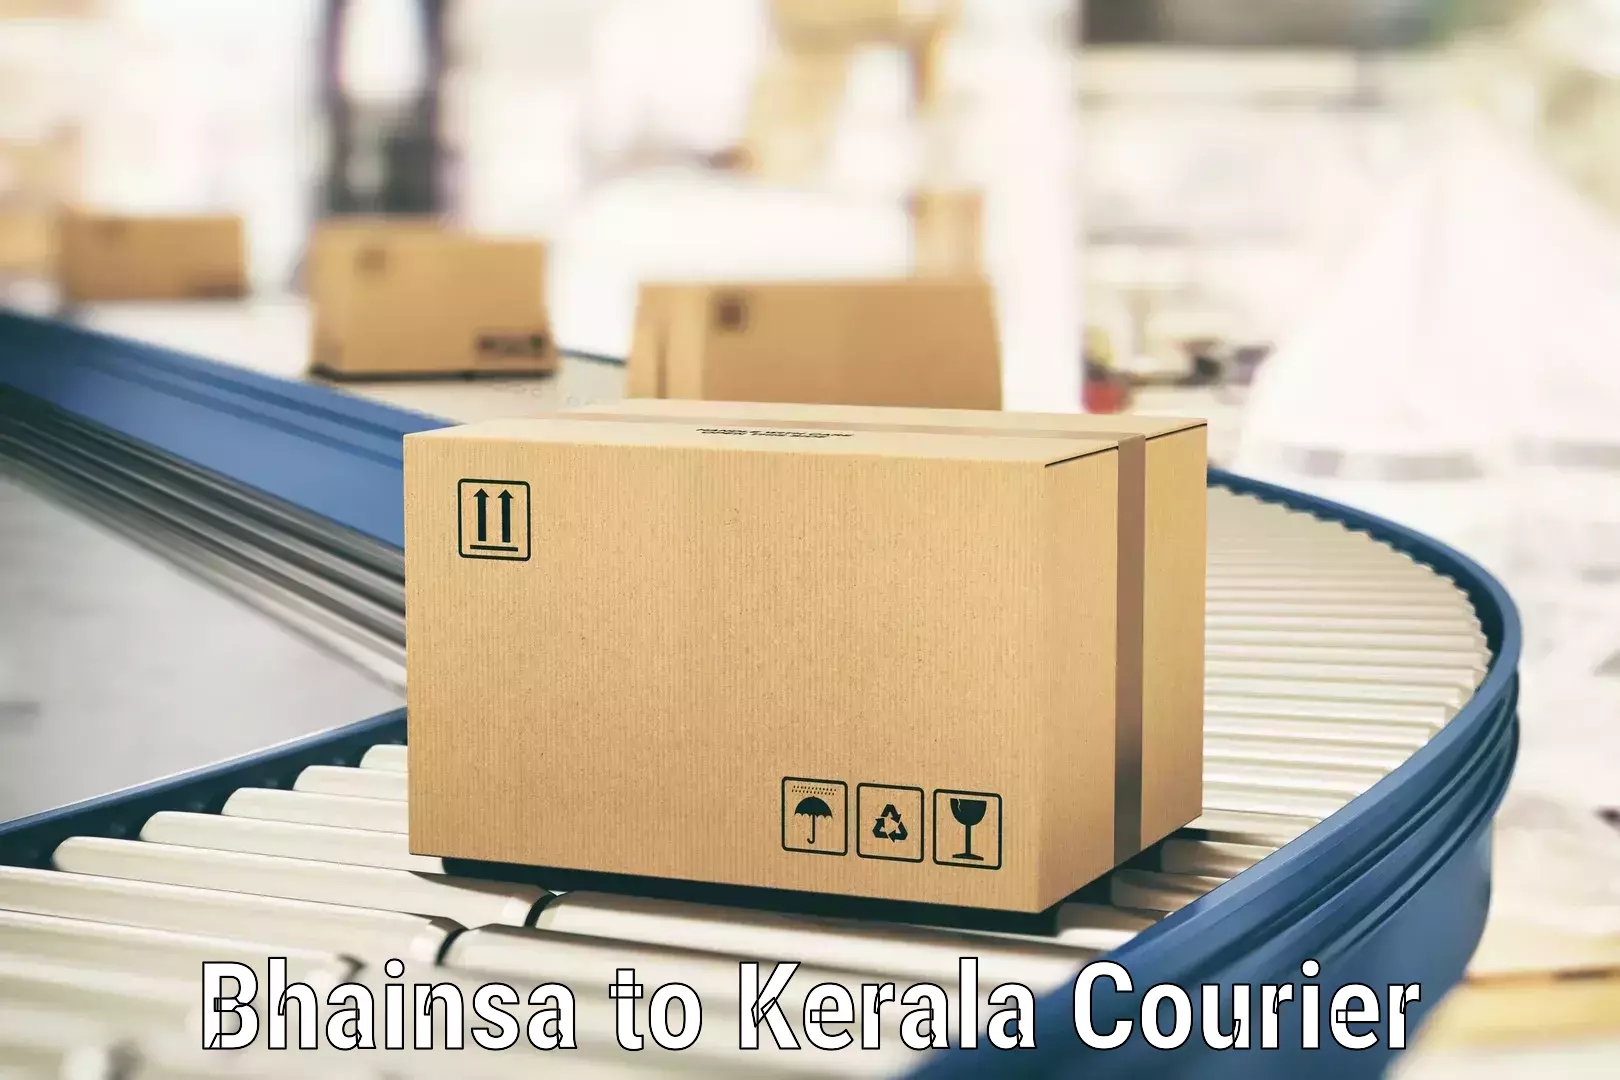 Express delivery capabilities Bhainsa to Cochin University of Science and Technology